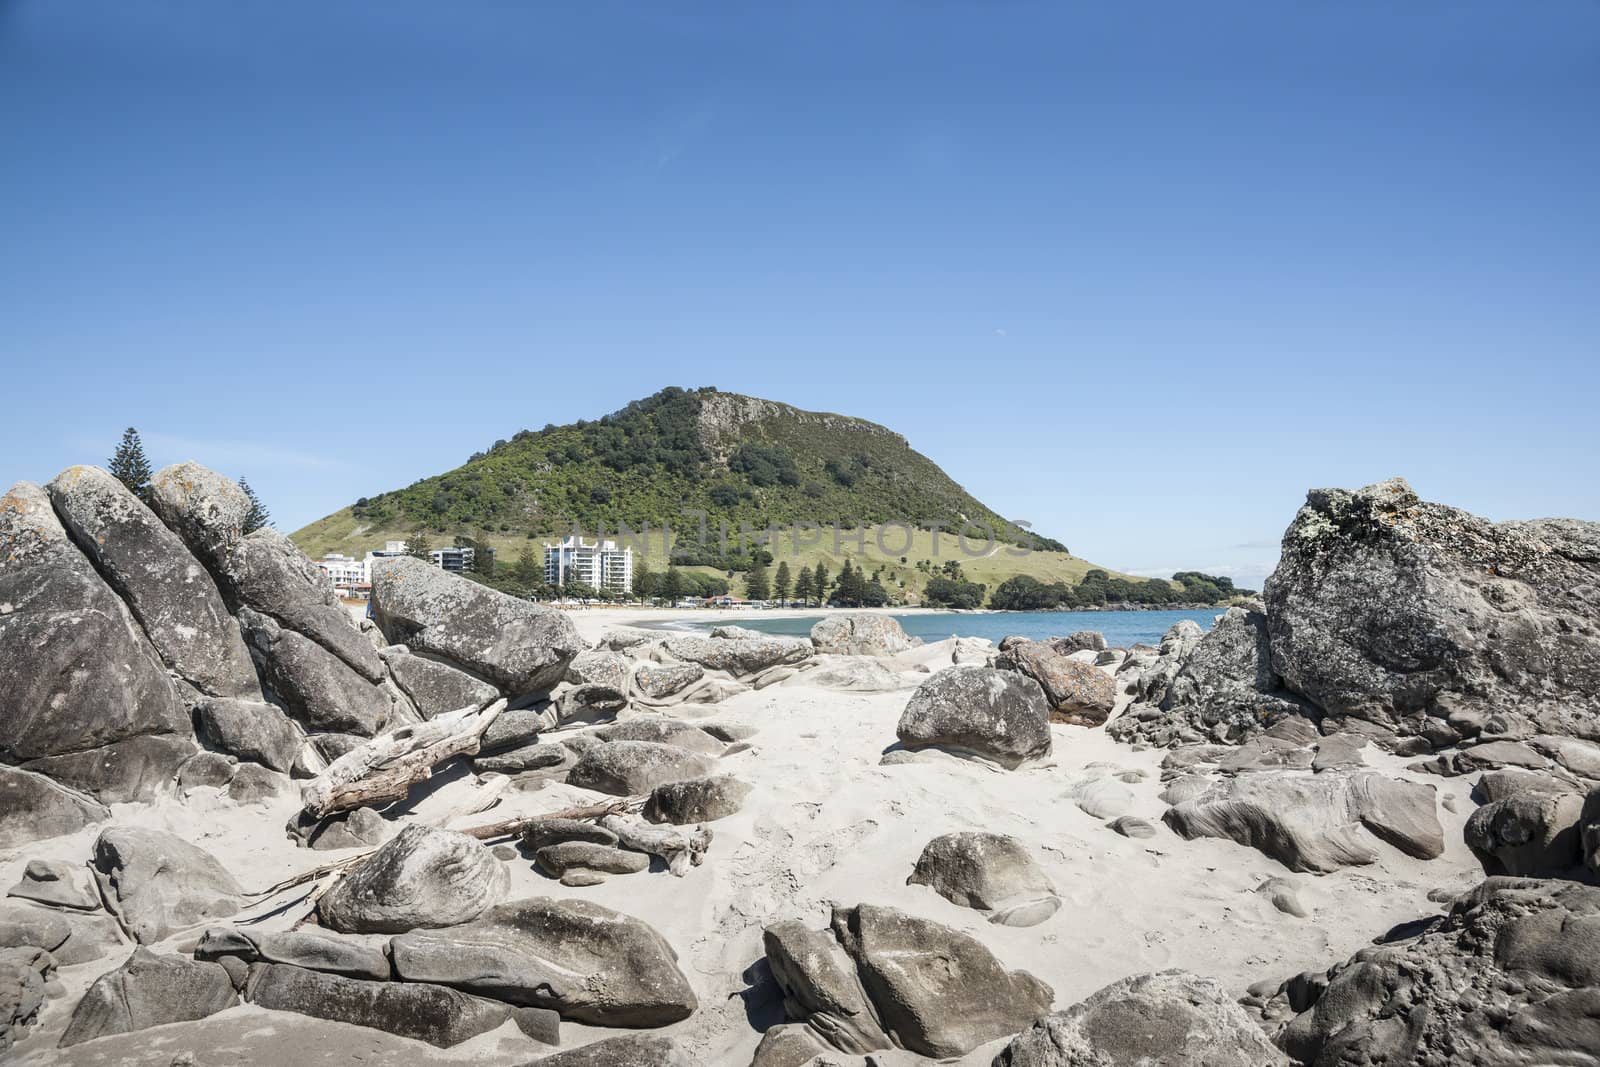 Mount Maunganui, at end of the beach with Rocky foreground.